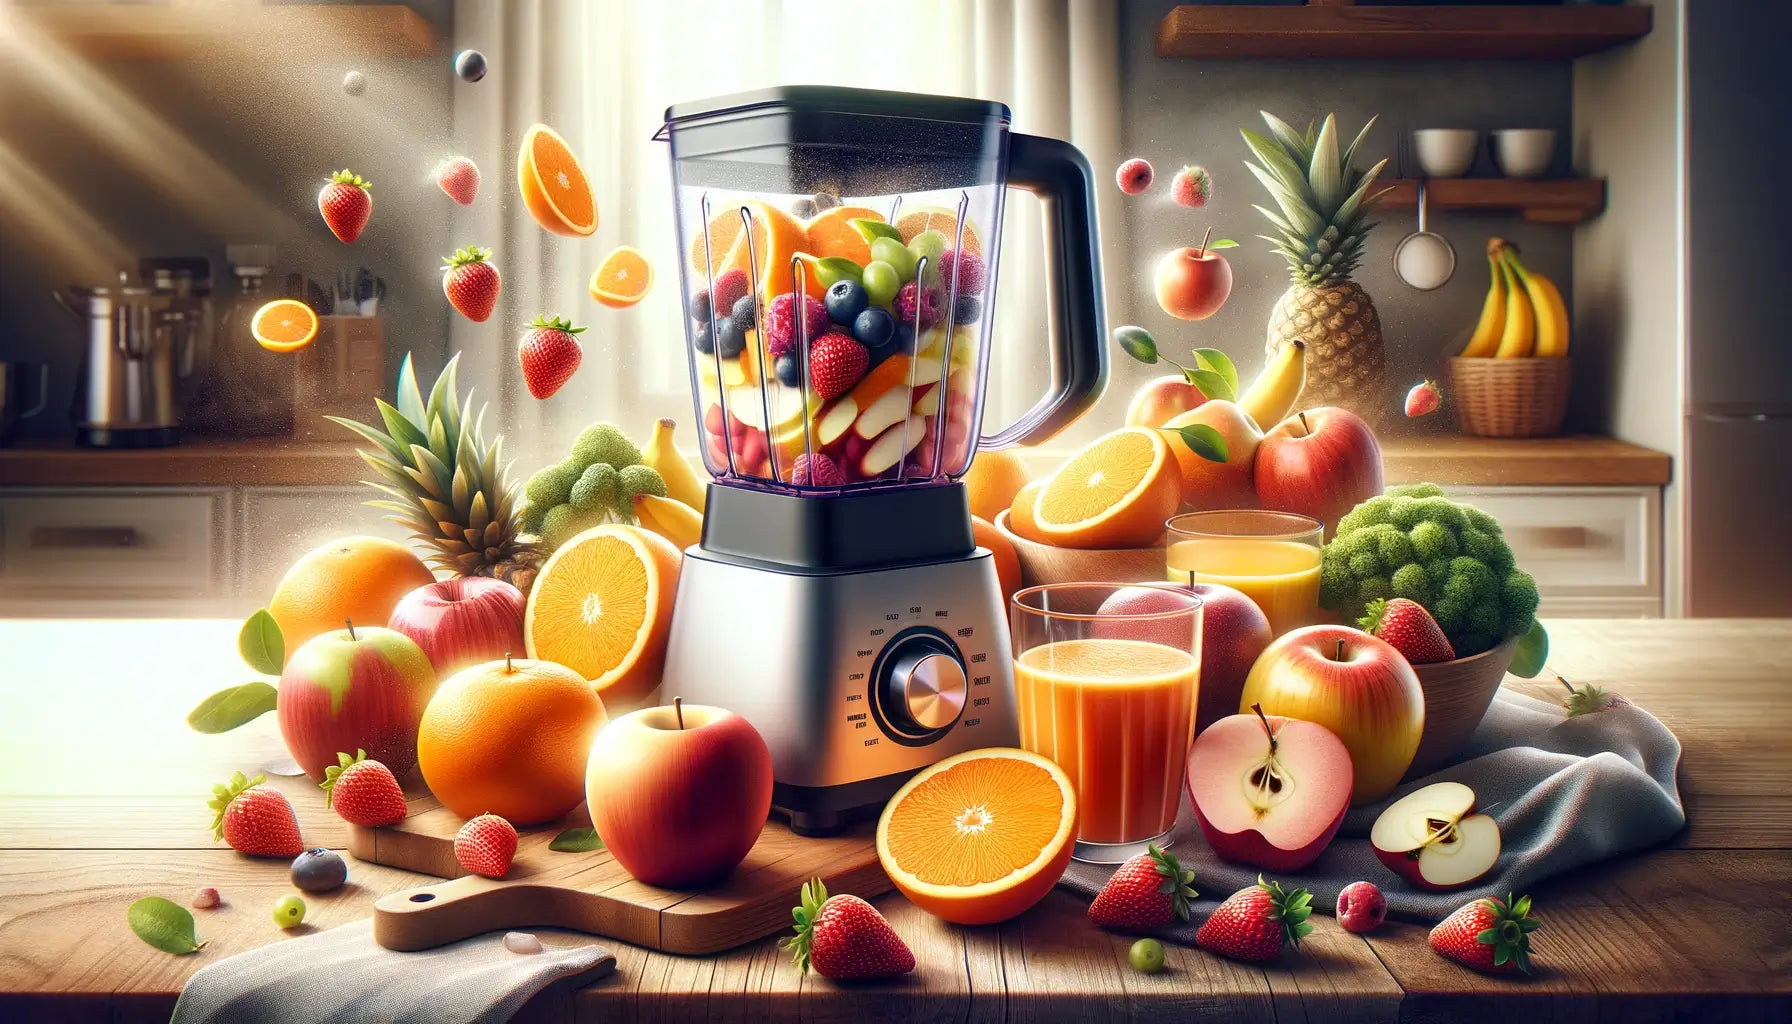 How to Make Juice With a Blender? Love gadgets